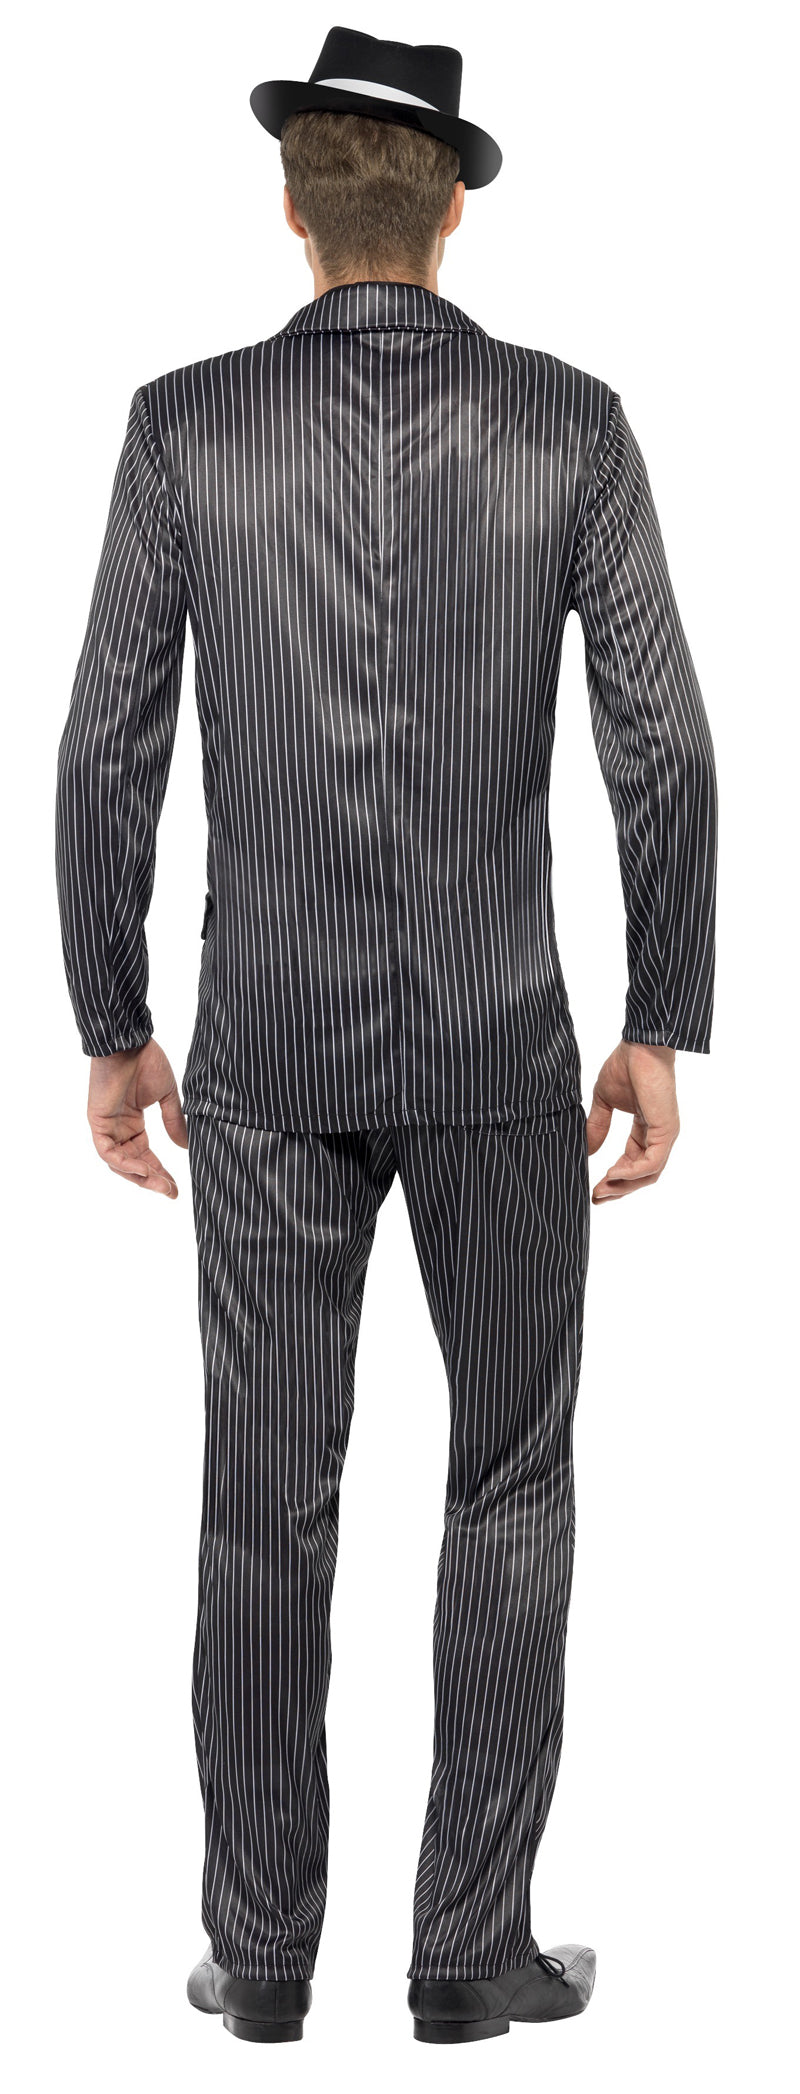 Gangster Mens Costume Classic Outlaw Outfit